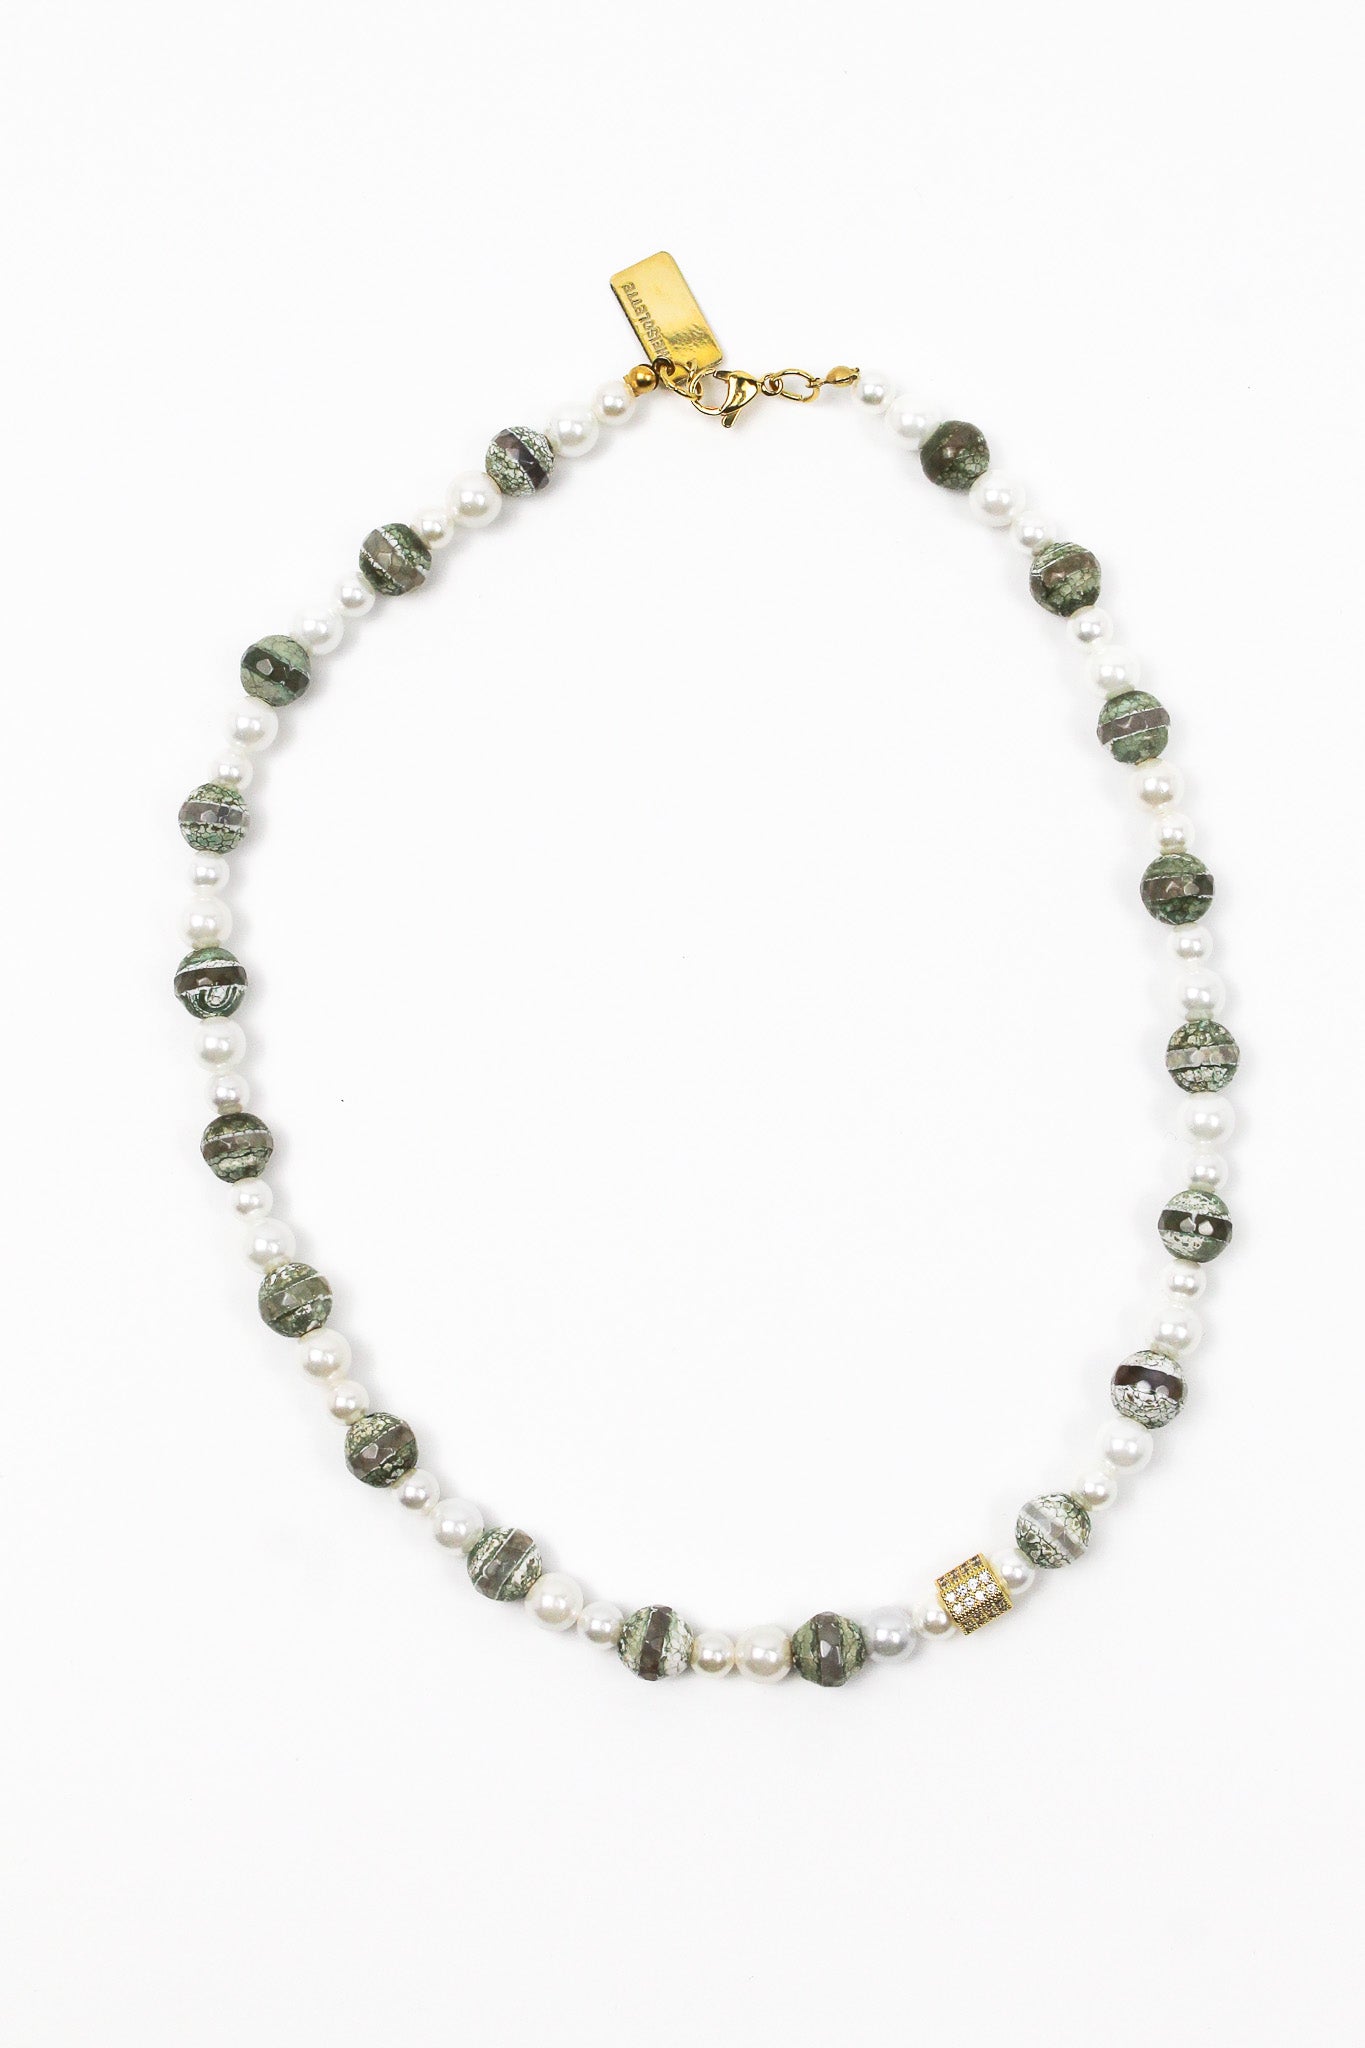 KHAKI Stones with Glass Pearls Necklace